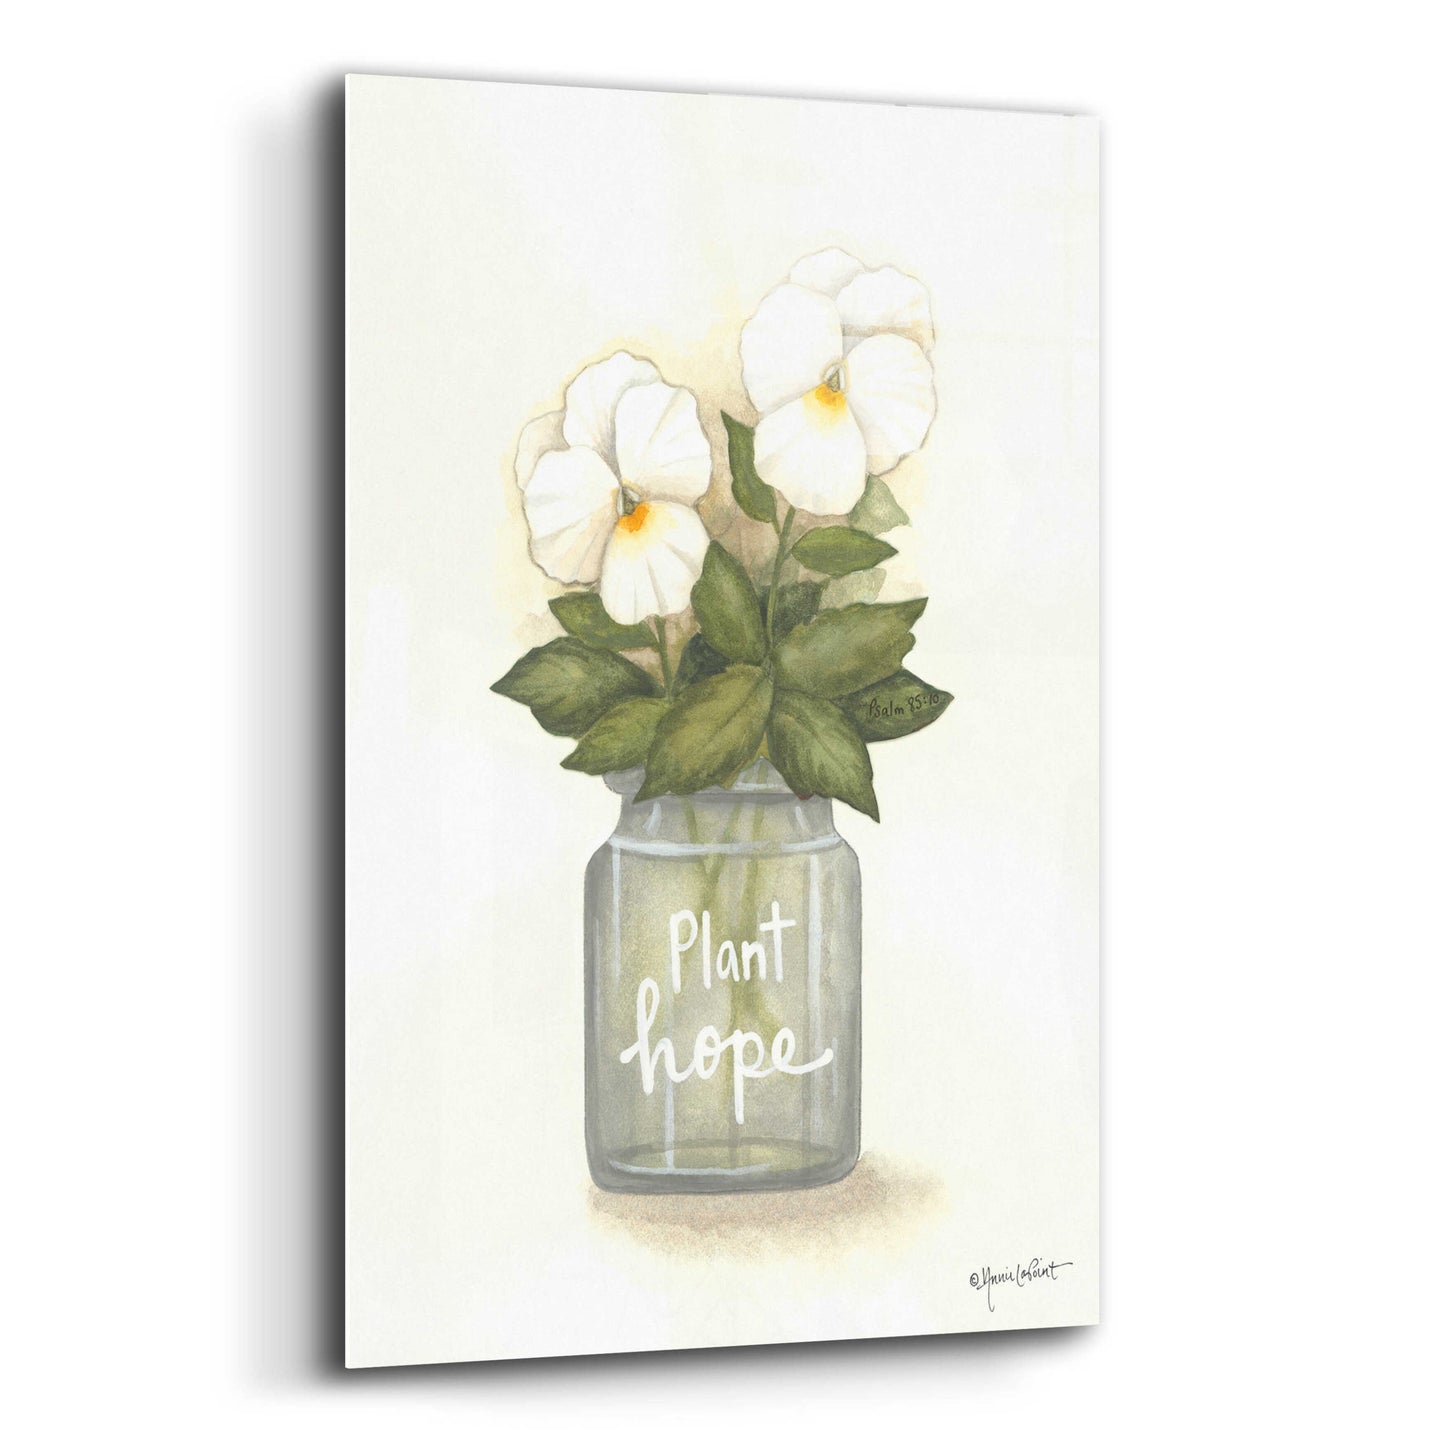 Epic Art 'Plant Hope Pansies' by Annie LaPoint, Acrylic Glass Wall Art,12x16